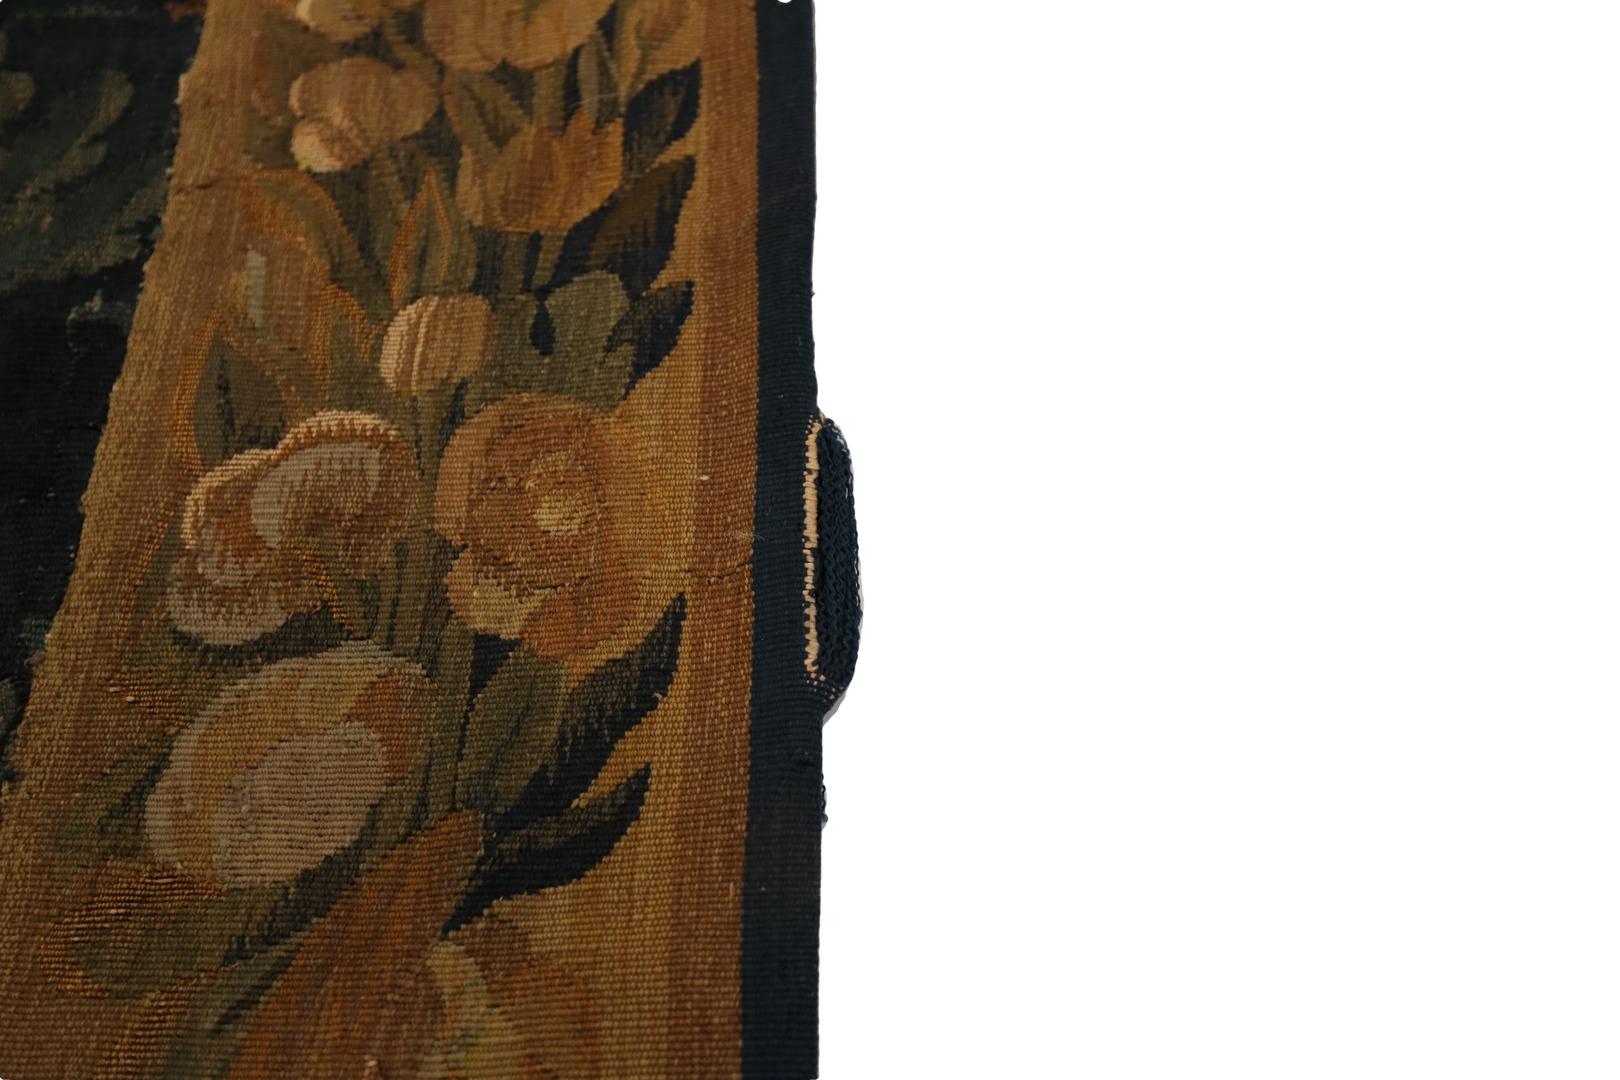 French 18th Century Tapestry, Mother Daughter - 8'5